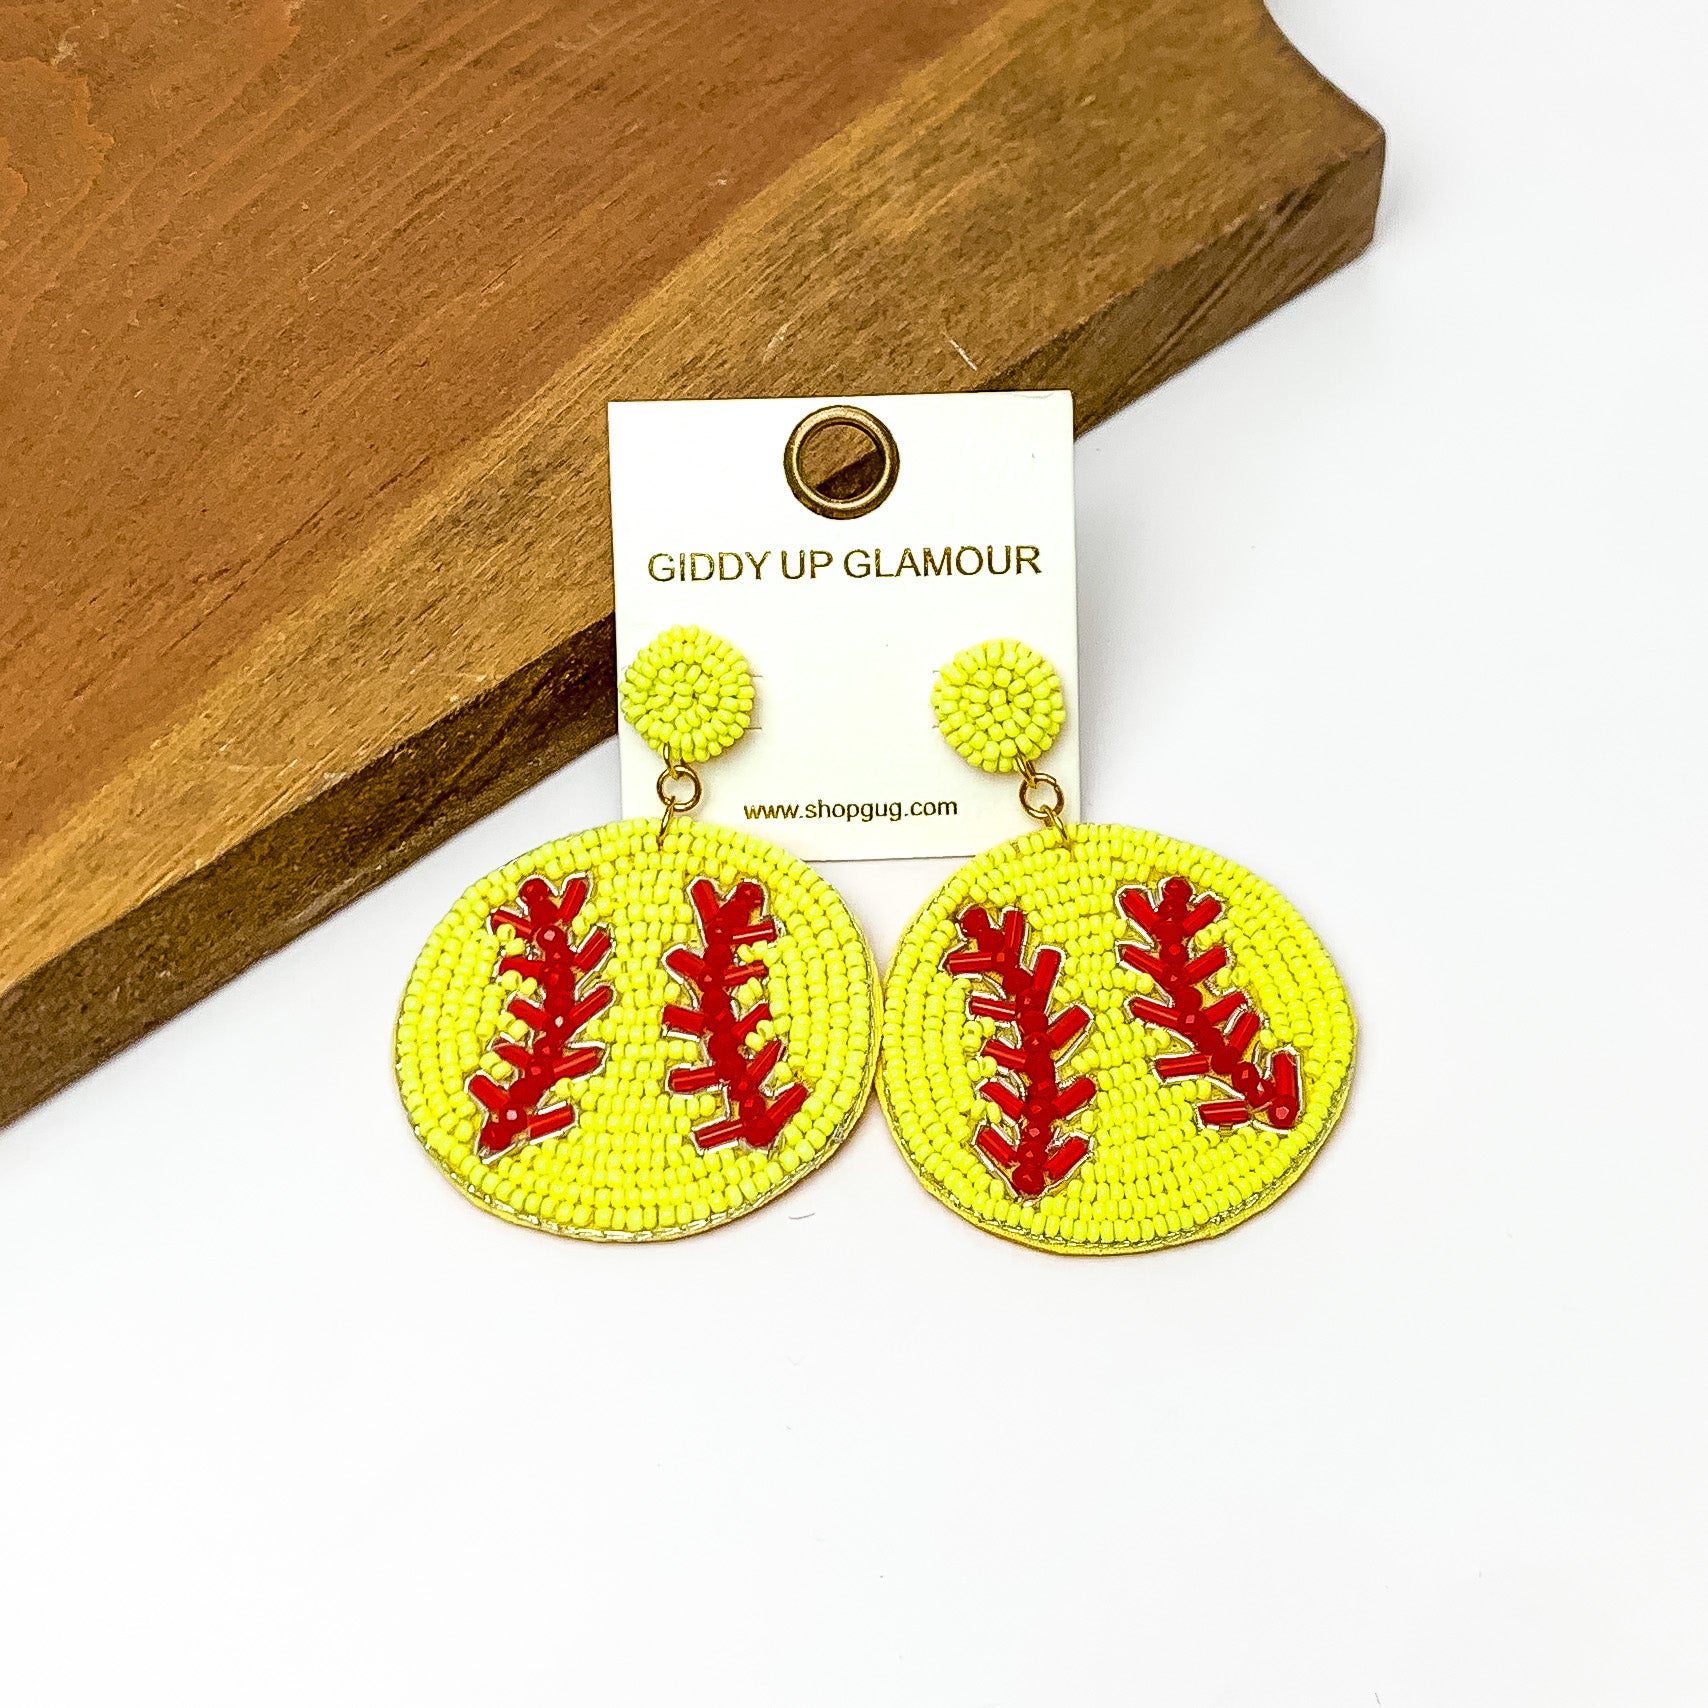 Softball Circular Earrings in Yellow. Pictured on a white background with the earrings against a wood piece.